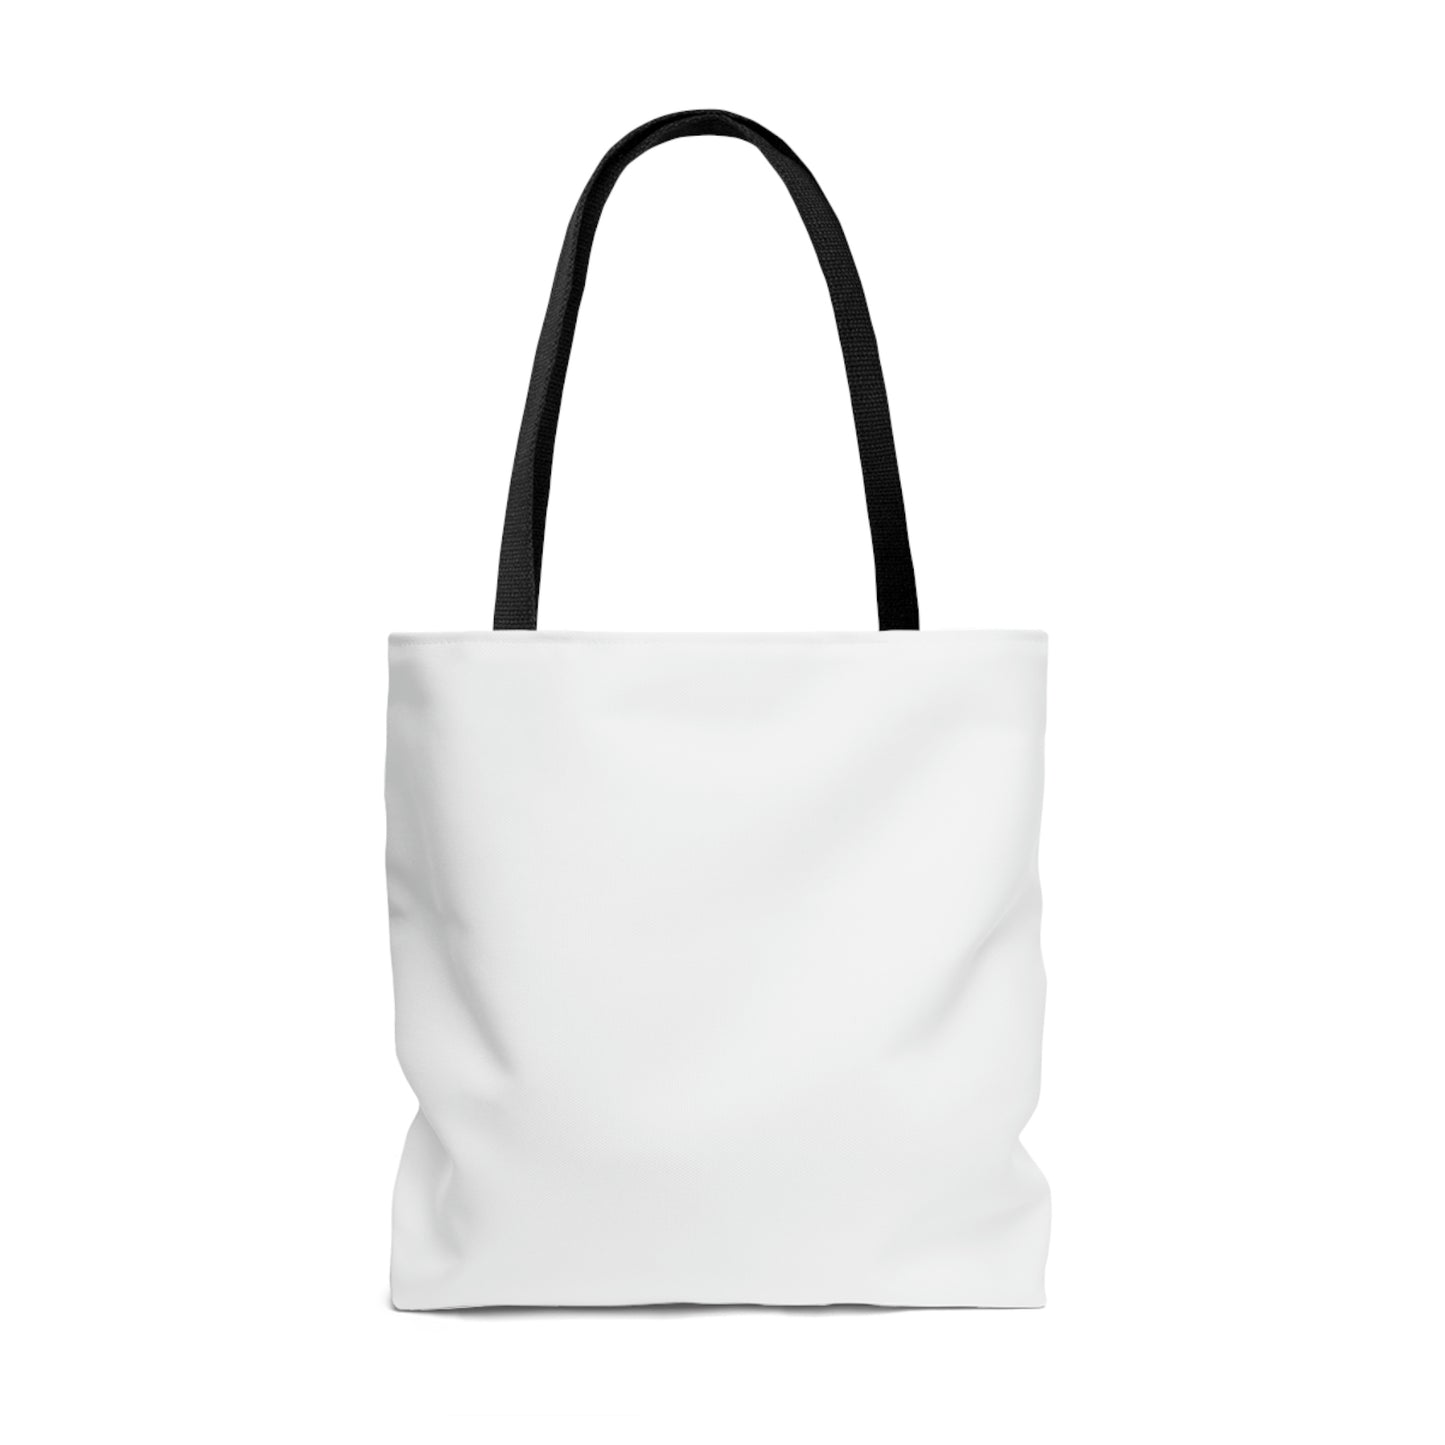 On My Journey Tote Bag